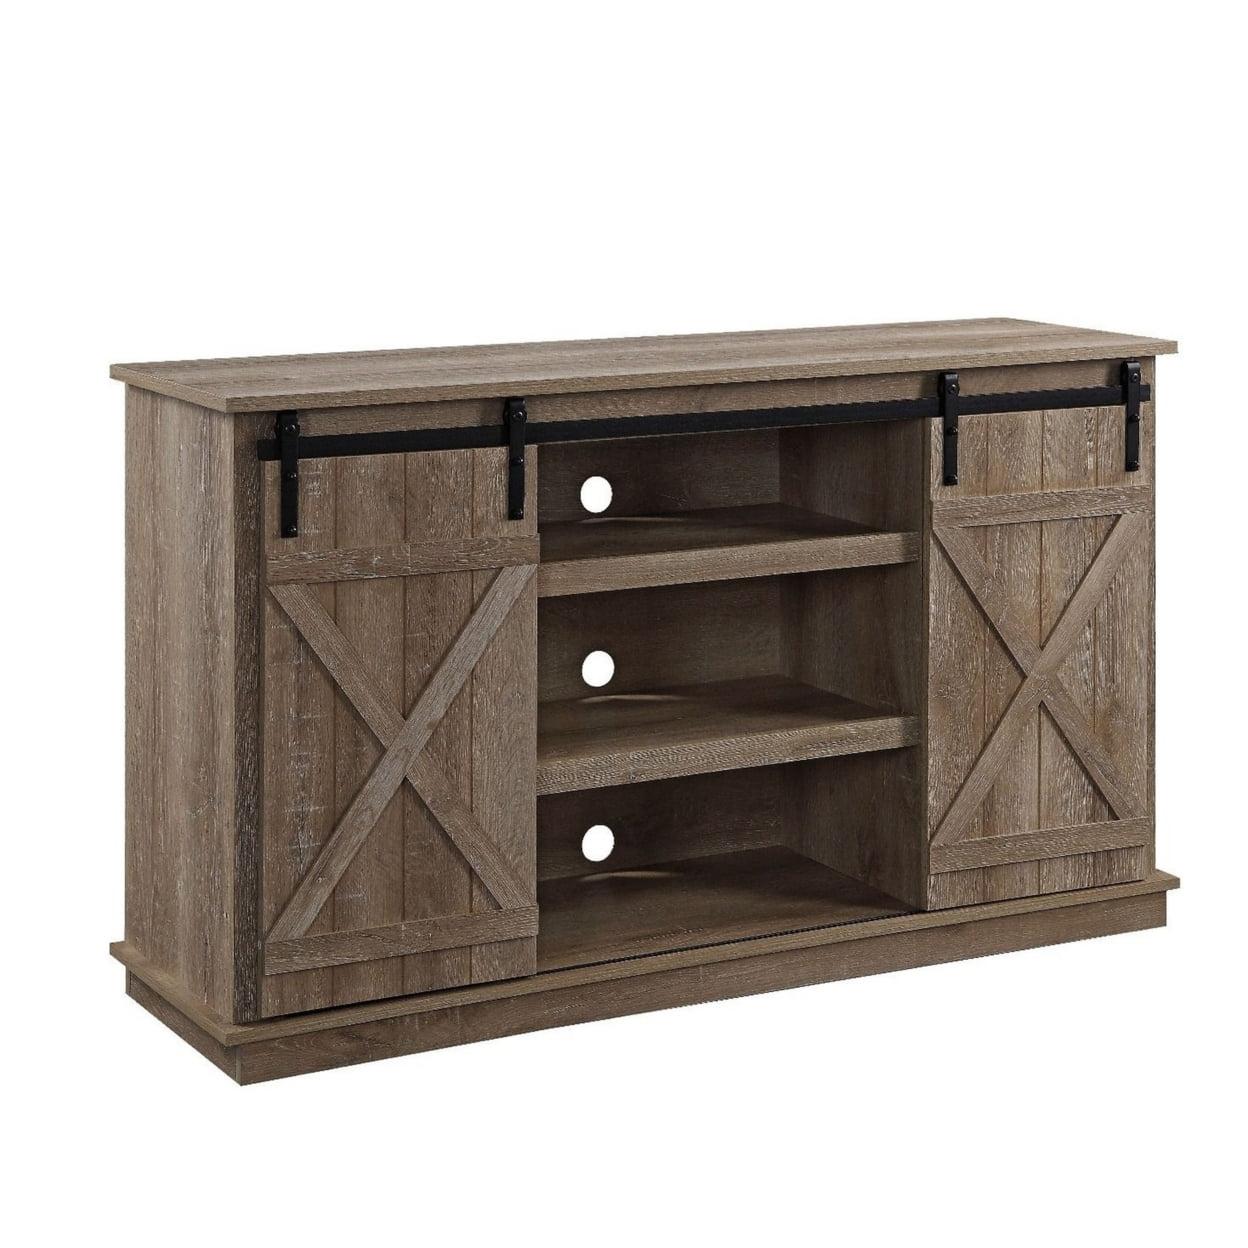 Rustic Brown Wooden TV Stand with Sliding Barn Doors